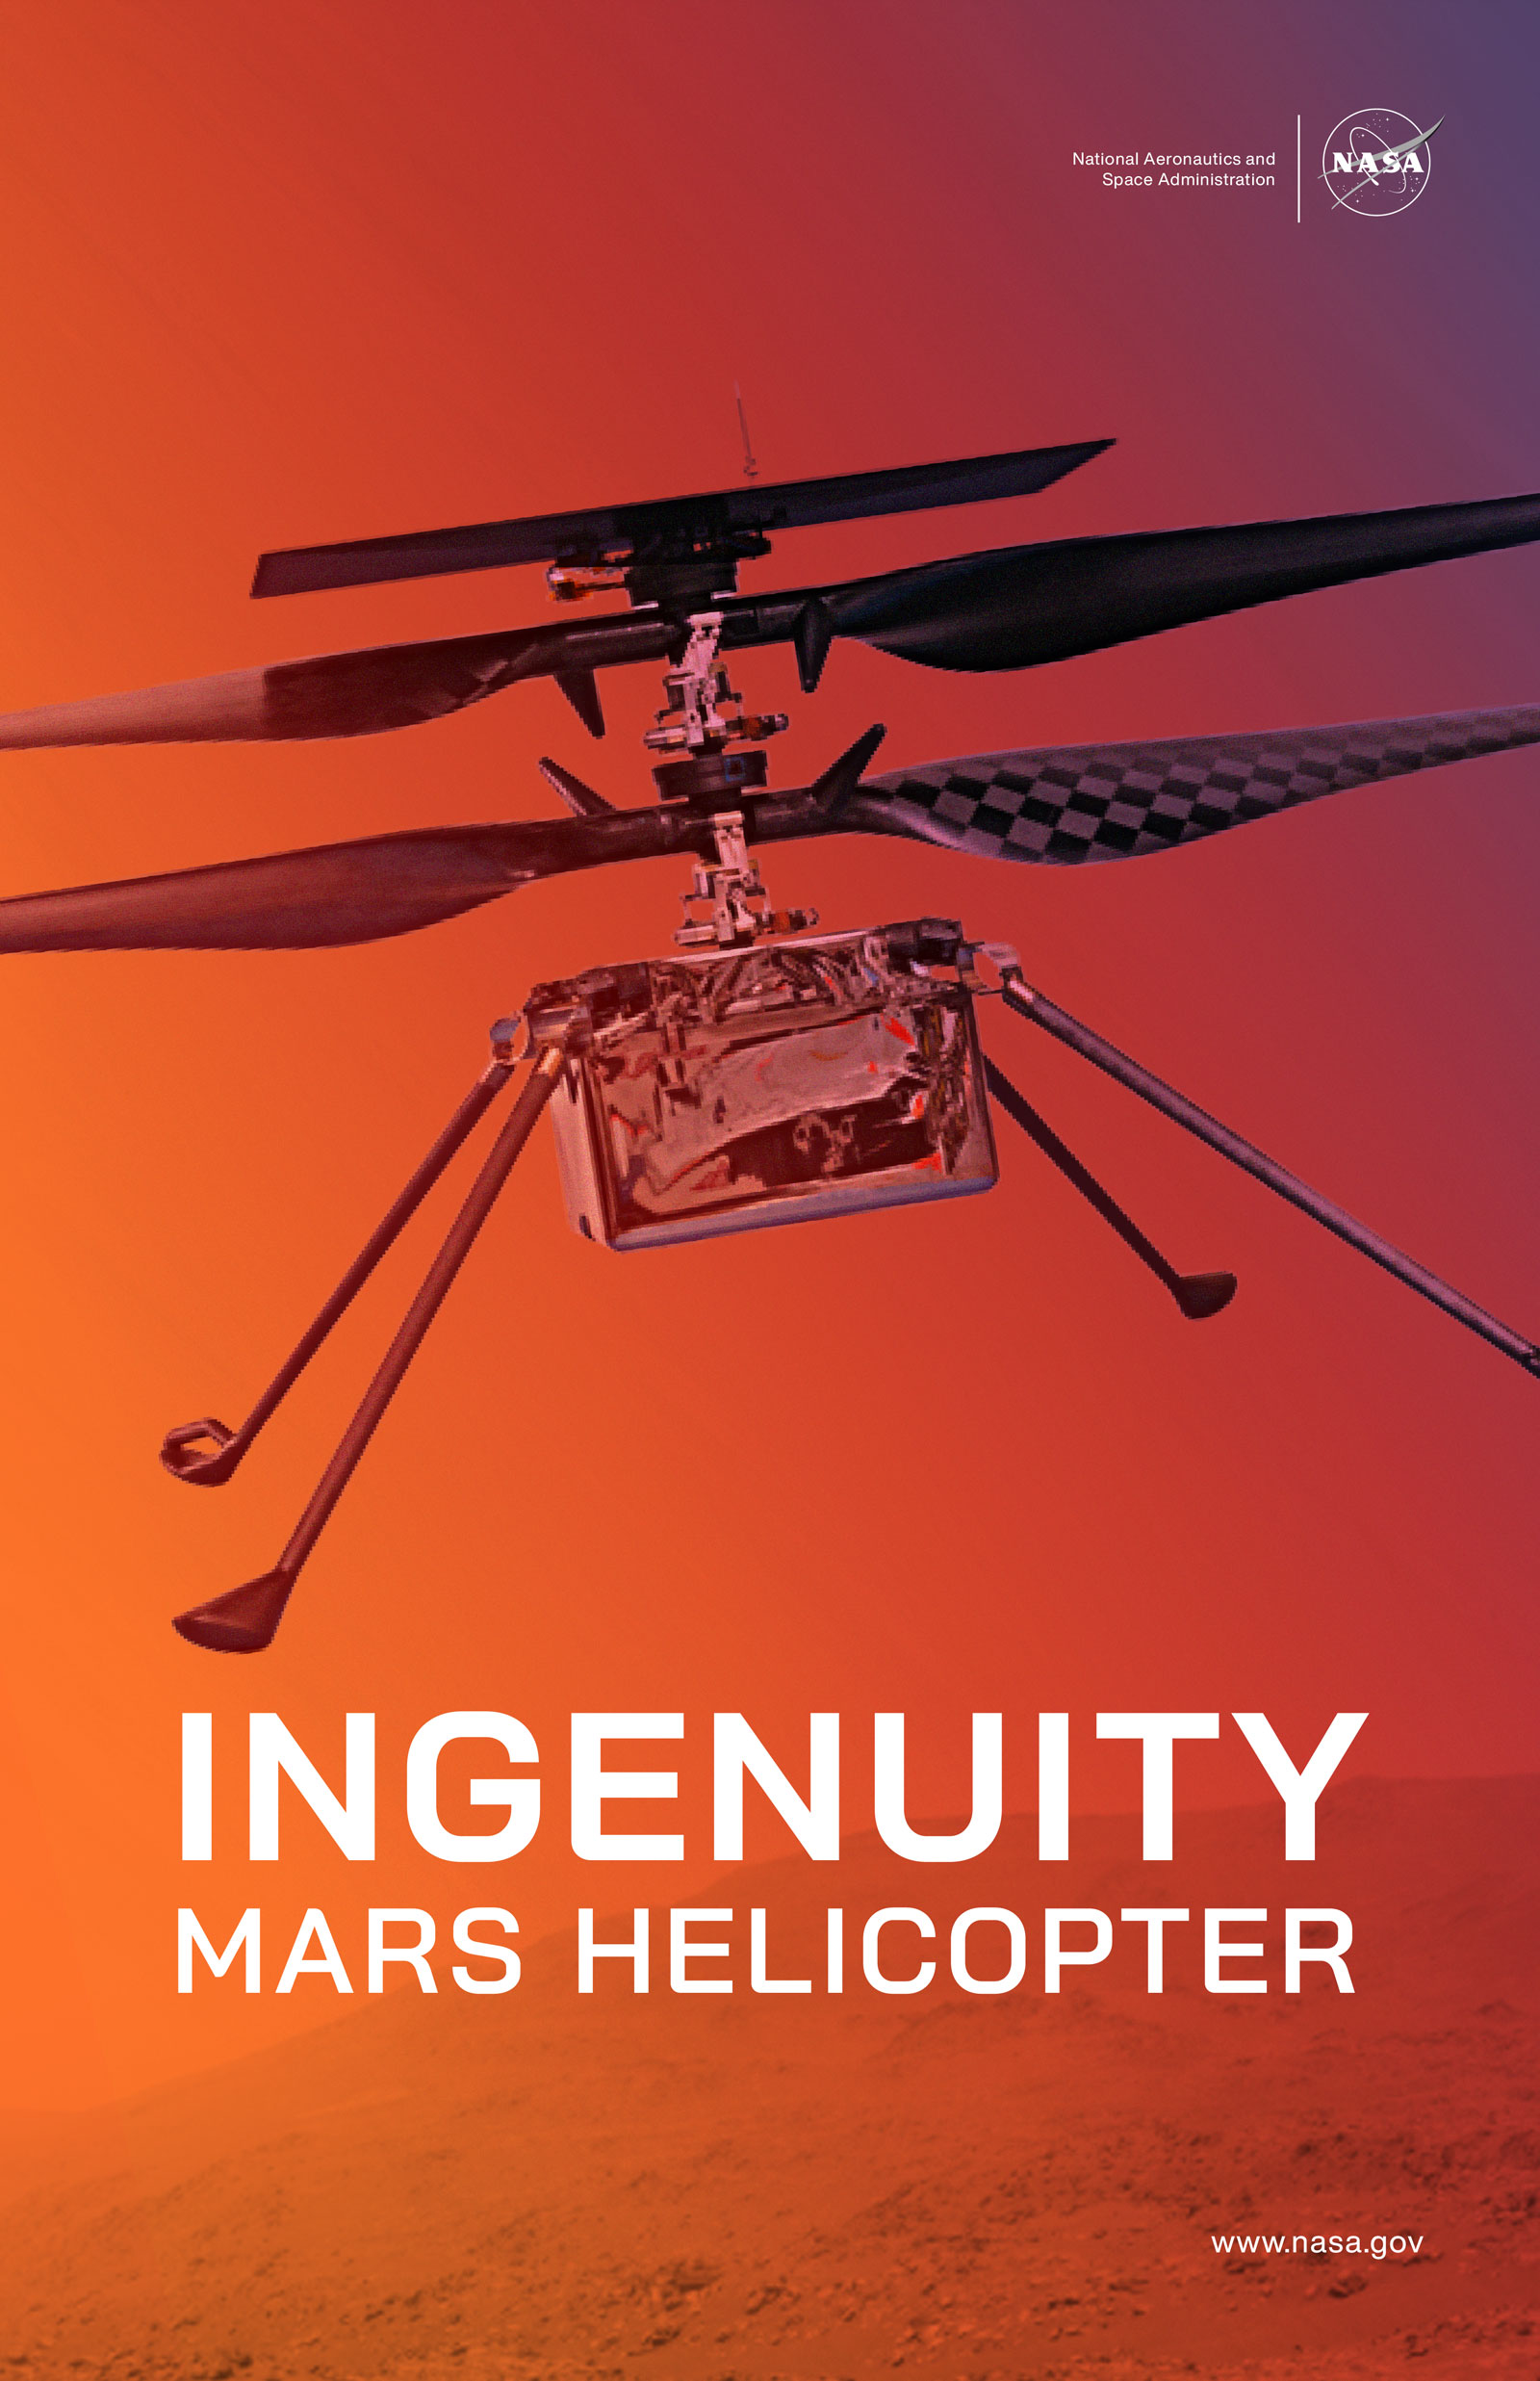 Celebrate the accomplishments of NASA’s Ingenuity Mars Helicopter with a vertical or horizontal poster illustration depicting the first helicopter on the Red Planet. 